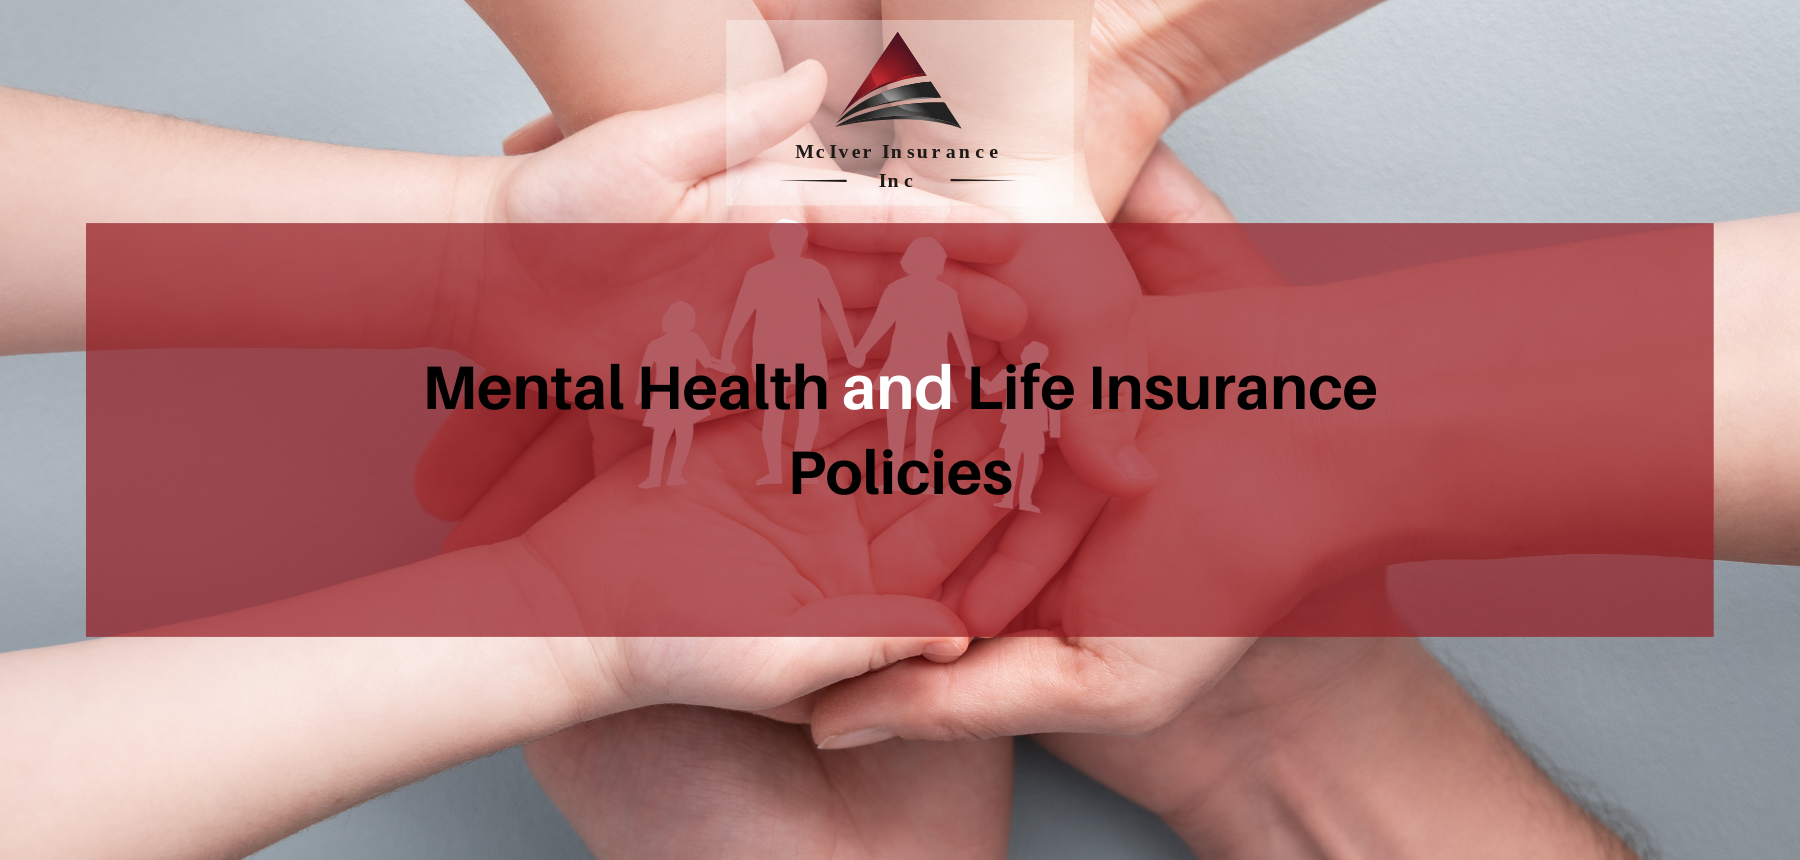 Mental Health and Life Insurance Policies